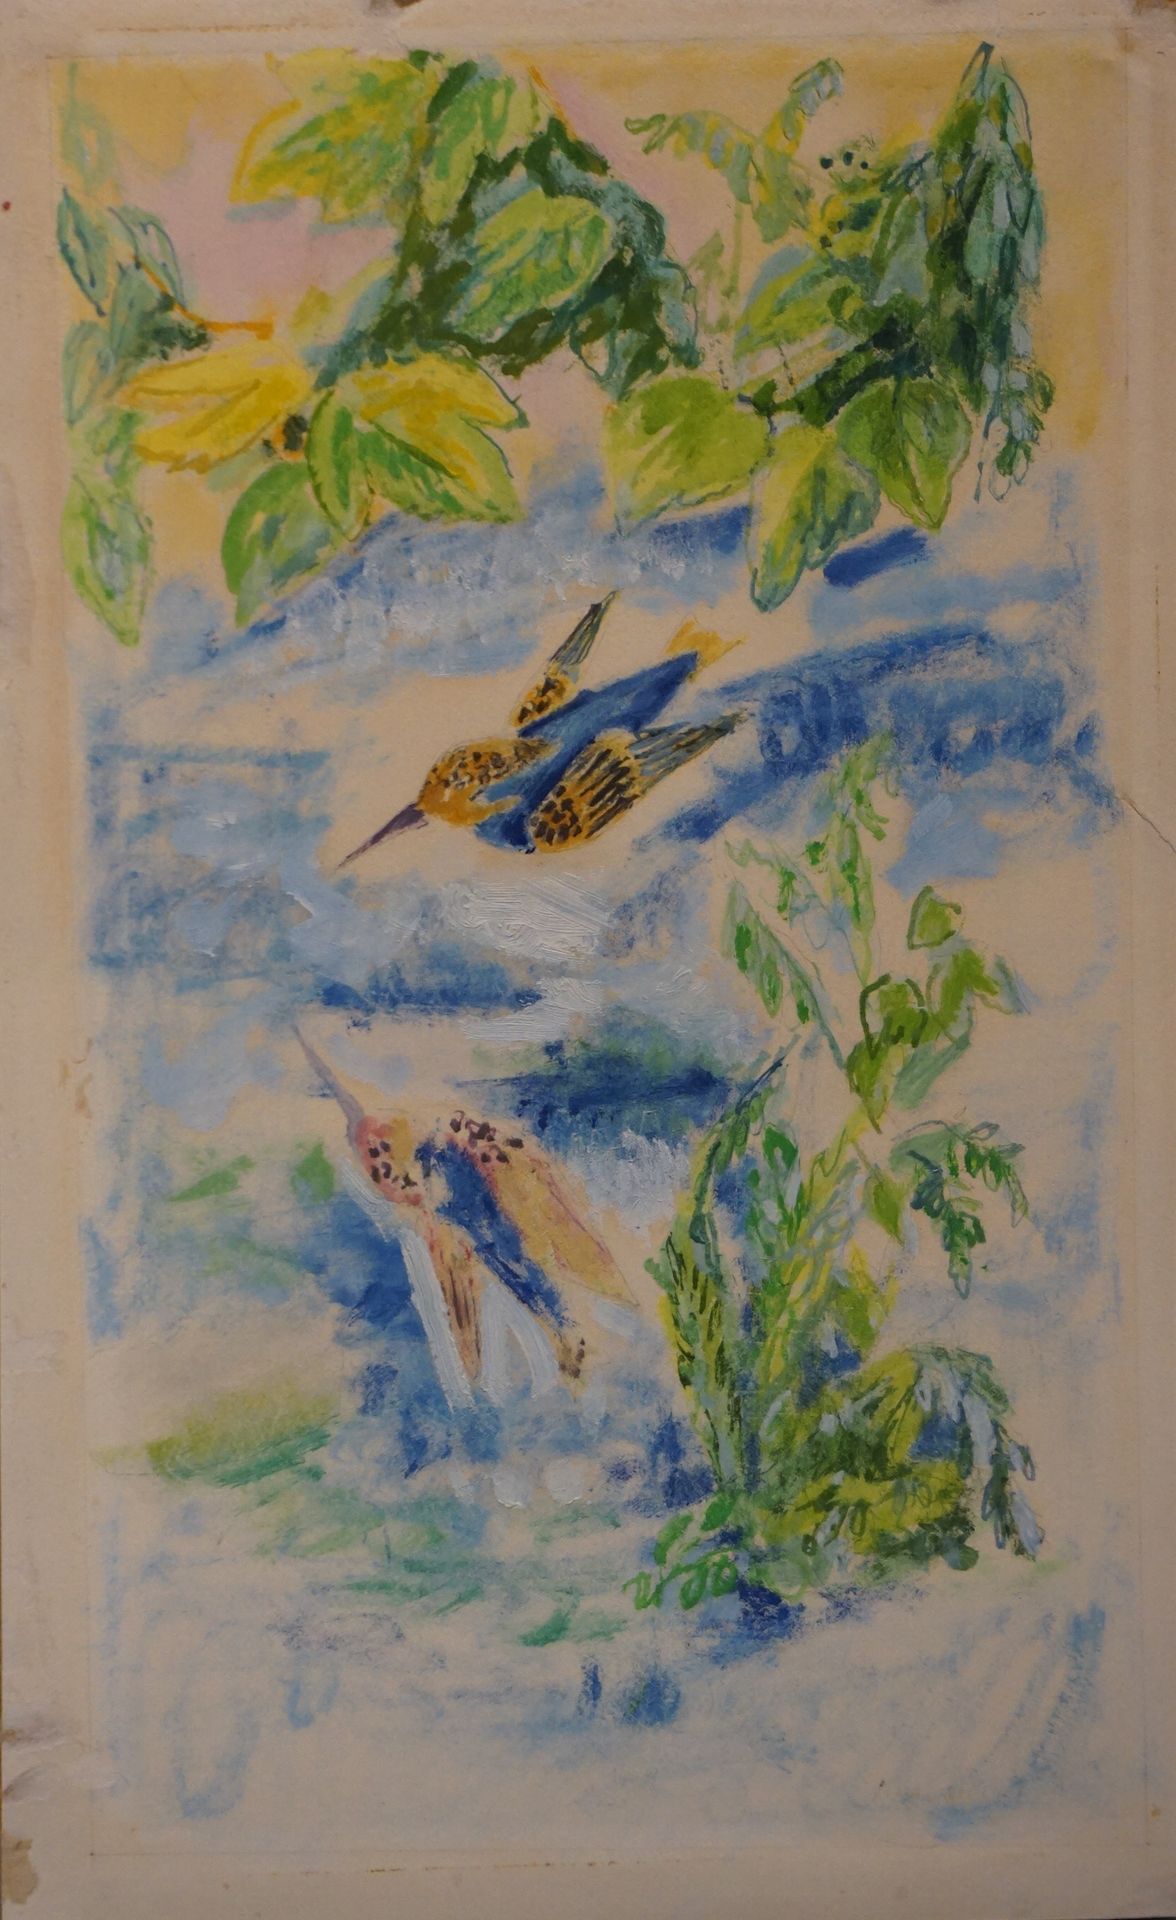 Jules CAVAILLES (1901-1977) "The kingfishers", watercolor, sbd. 39x23 cm